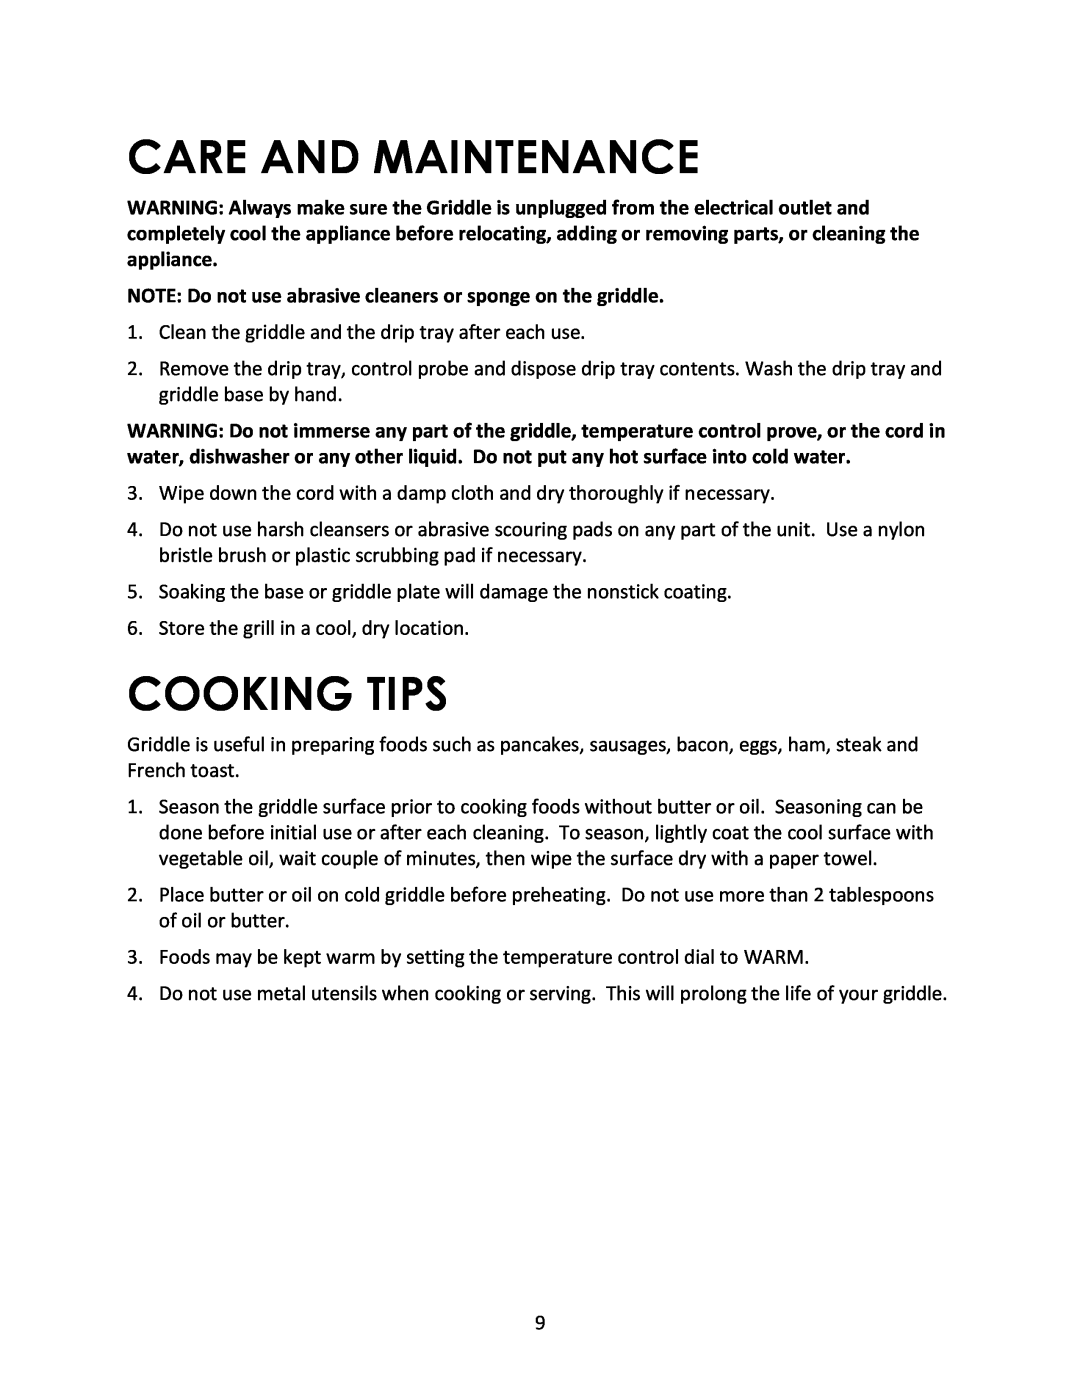 Magic Chef MCSG19B1 instruction manual Care And Maintenance, Cooking Tips 